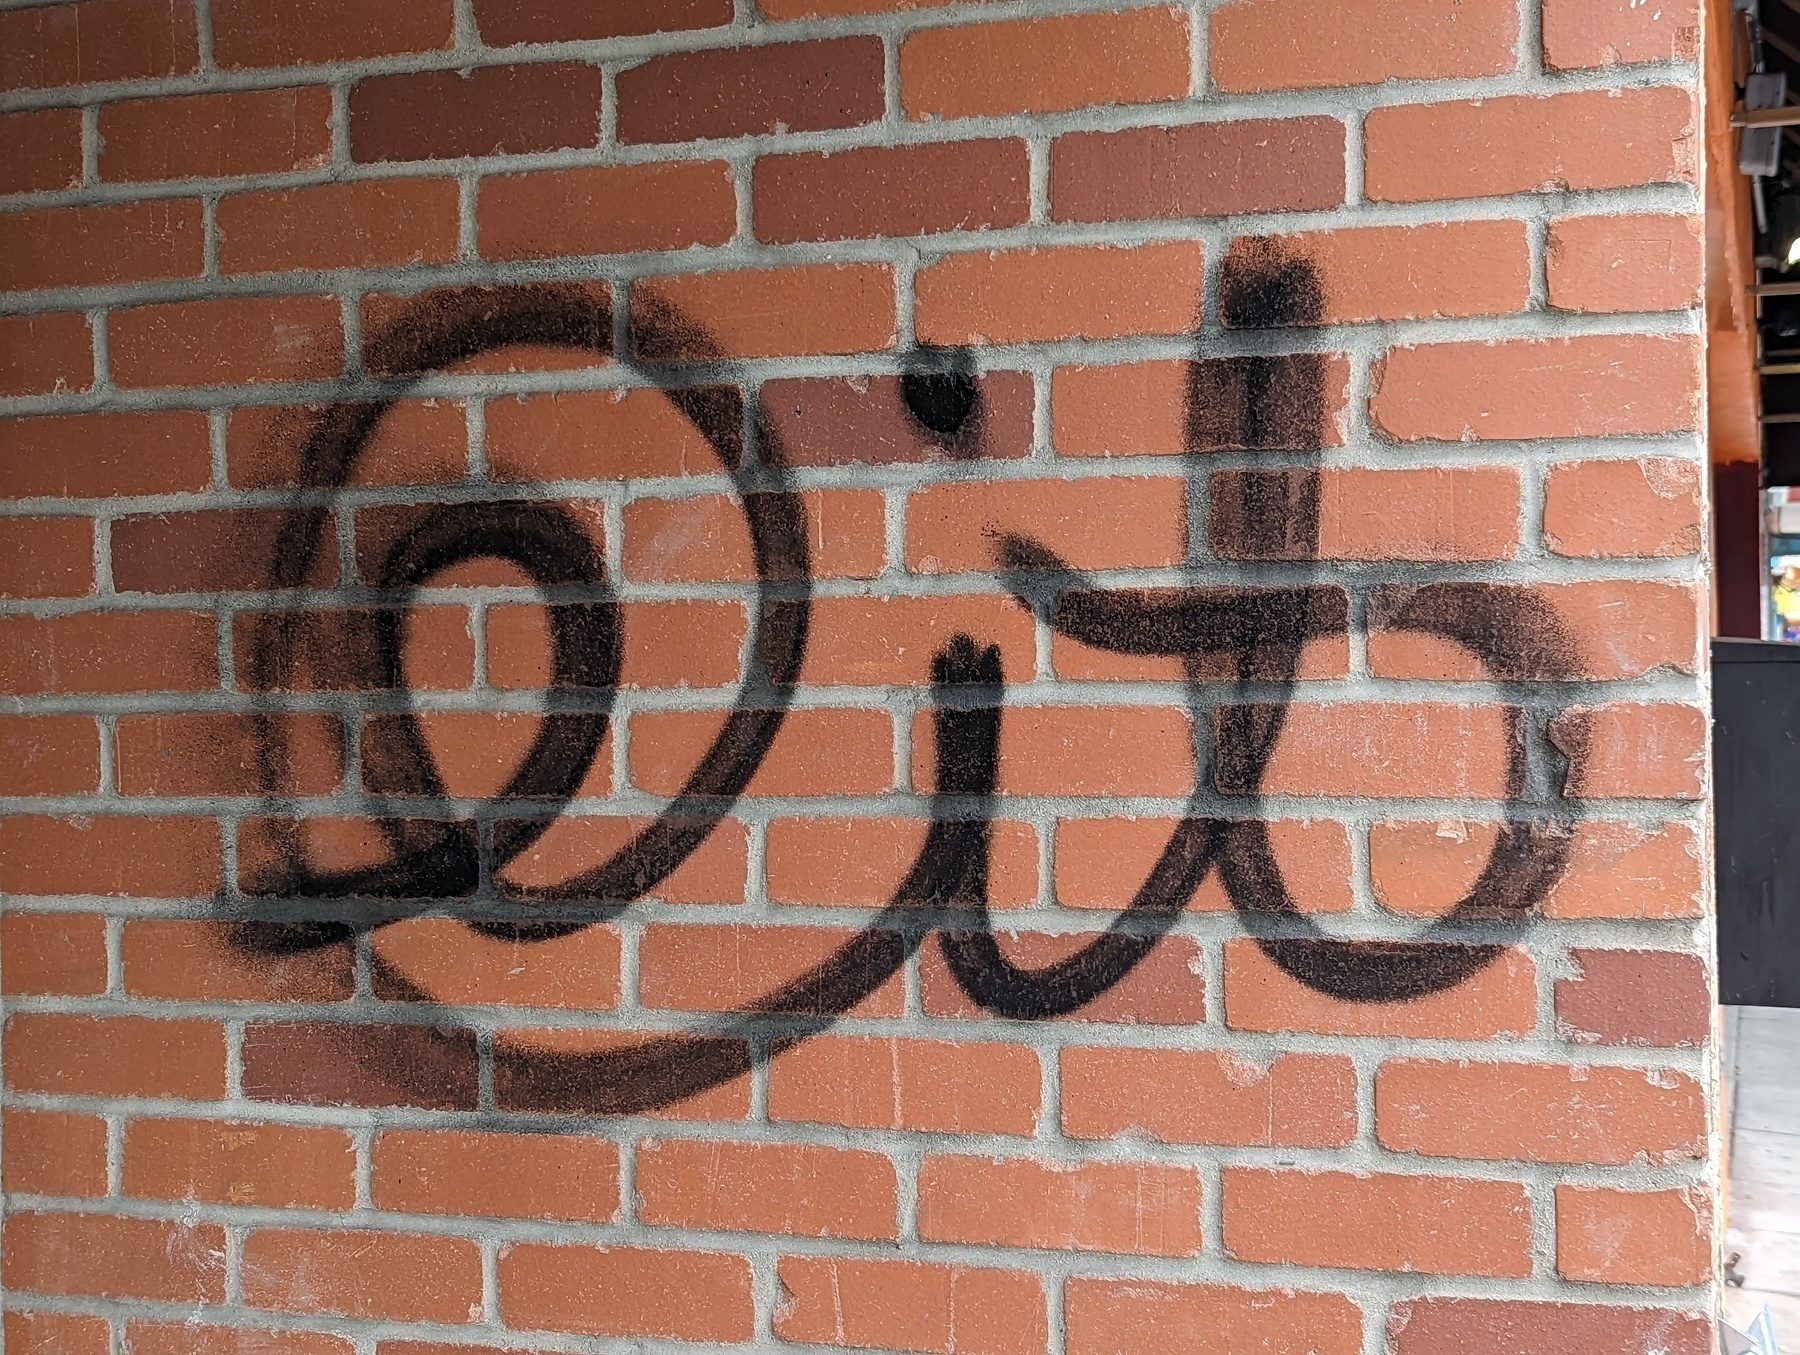 An at symbol and the word "it"  painted in black cursive spray paint on a brick wall on MacArthur Boulevard in Oakland, California's Laurel district Sunday, April 23, 2023.